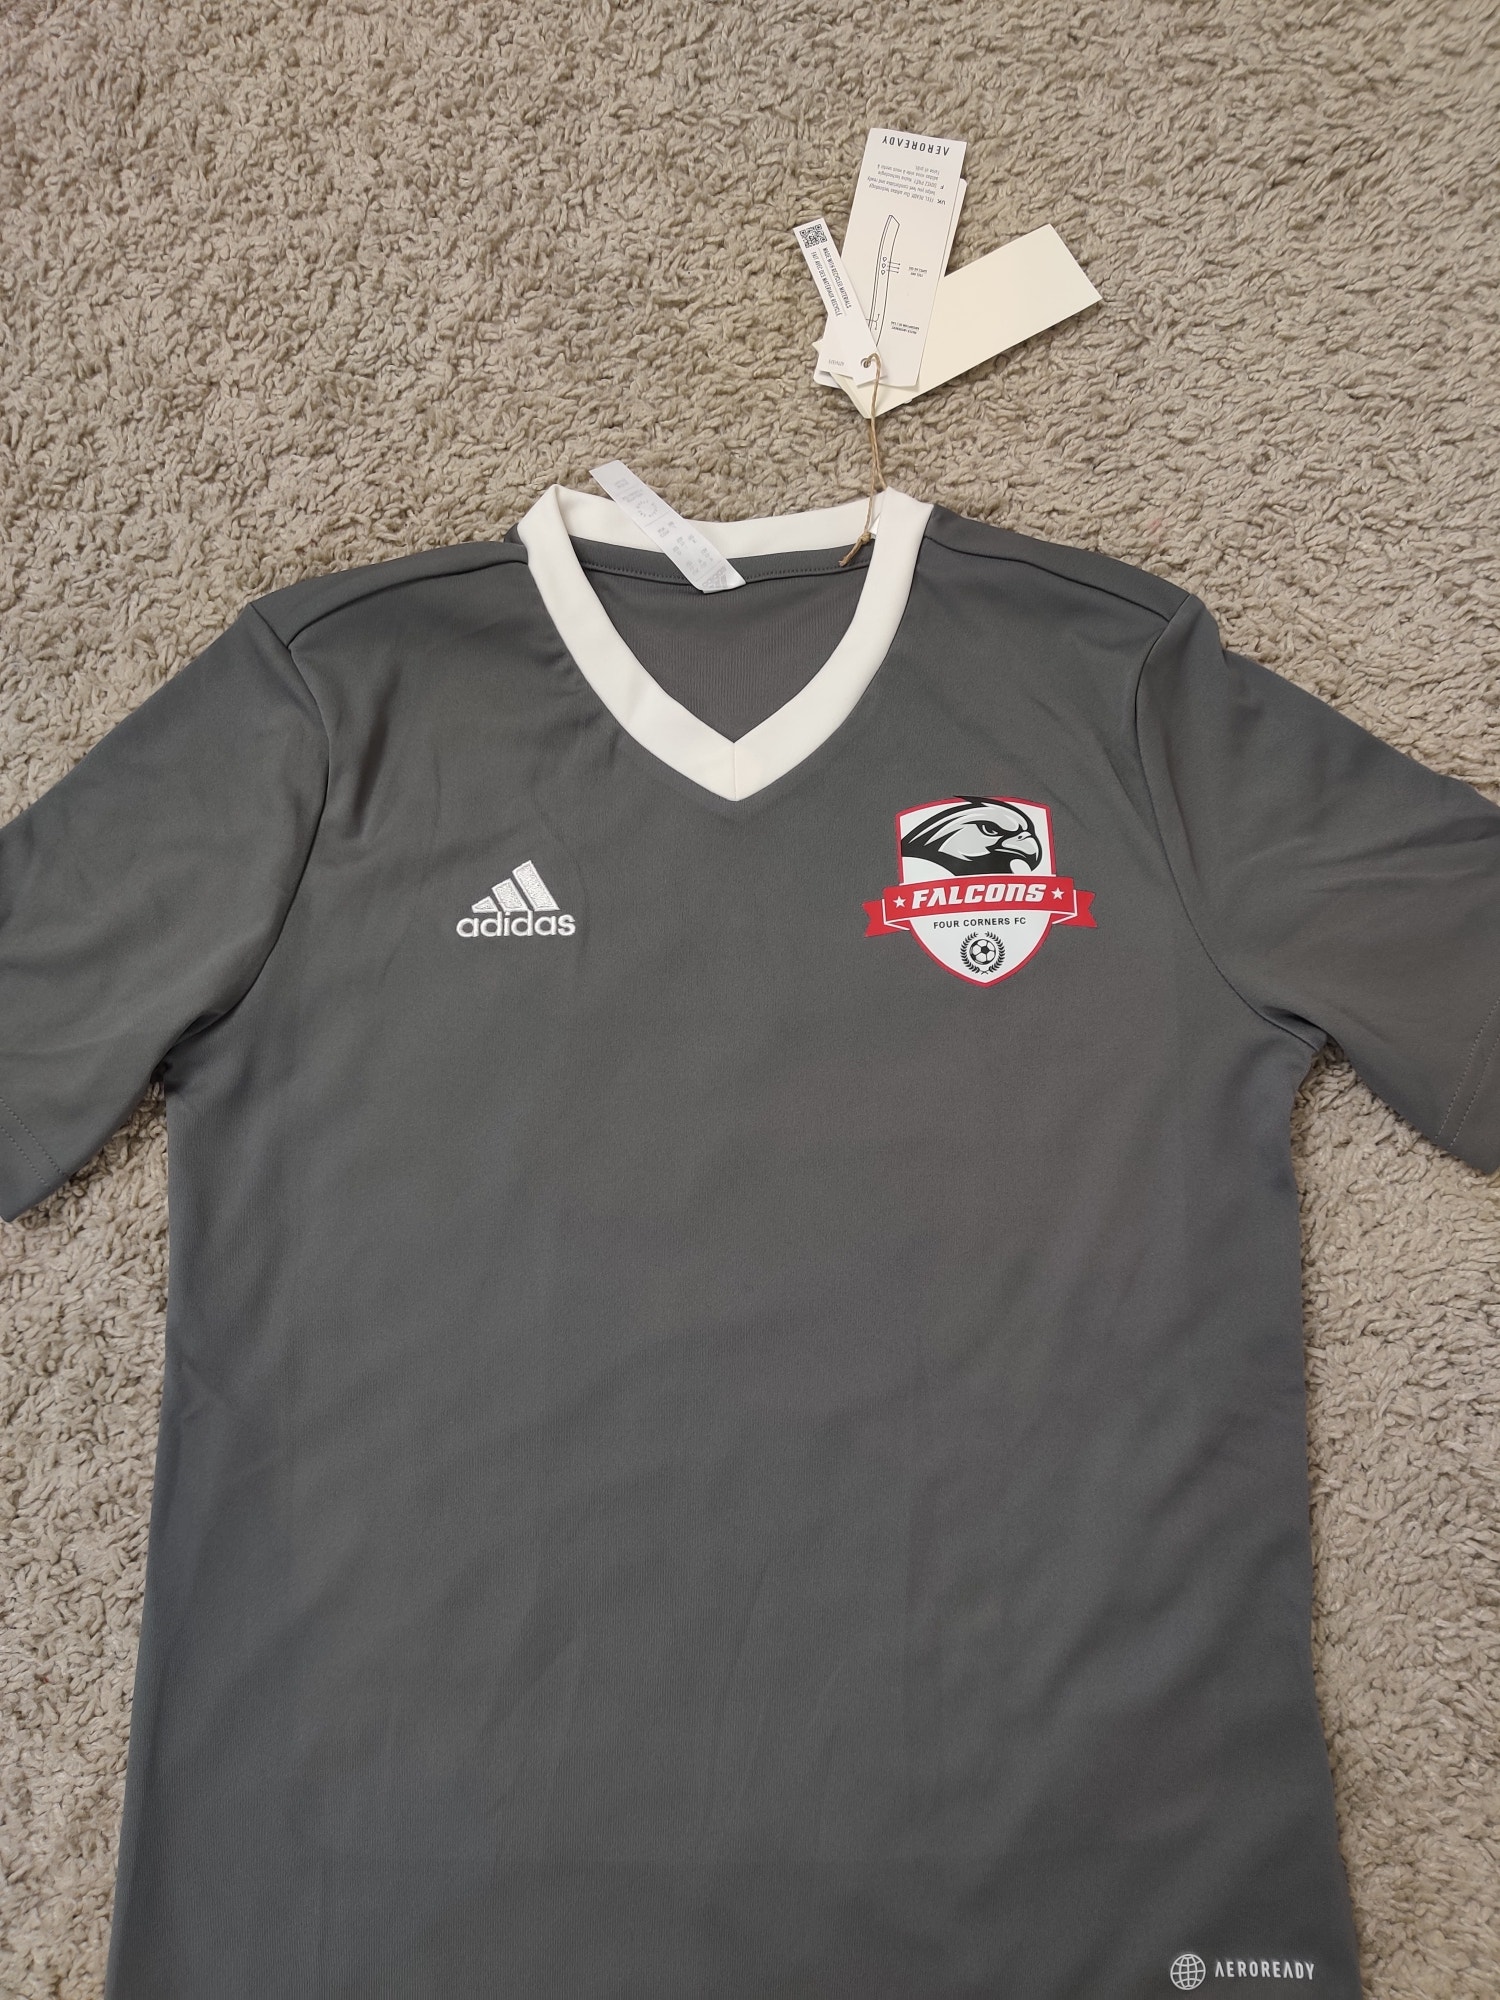 (V) NEW Adidas Youth Falcons Four Cornes FC #40 shirt soccer jersey sz M - Picture 4 of 9